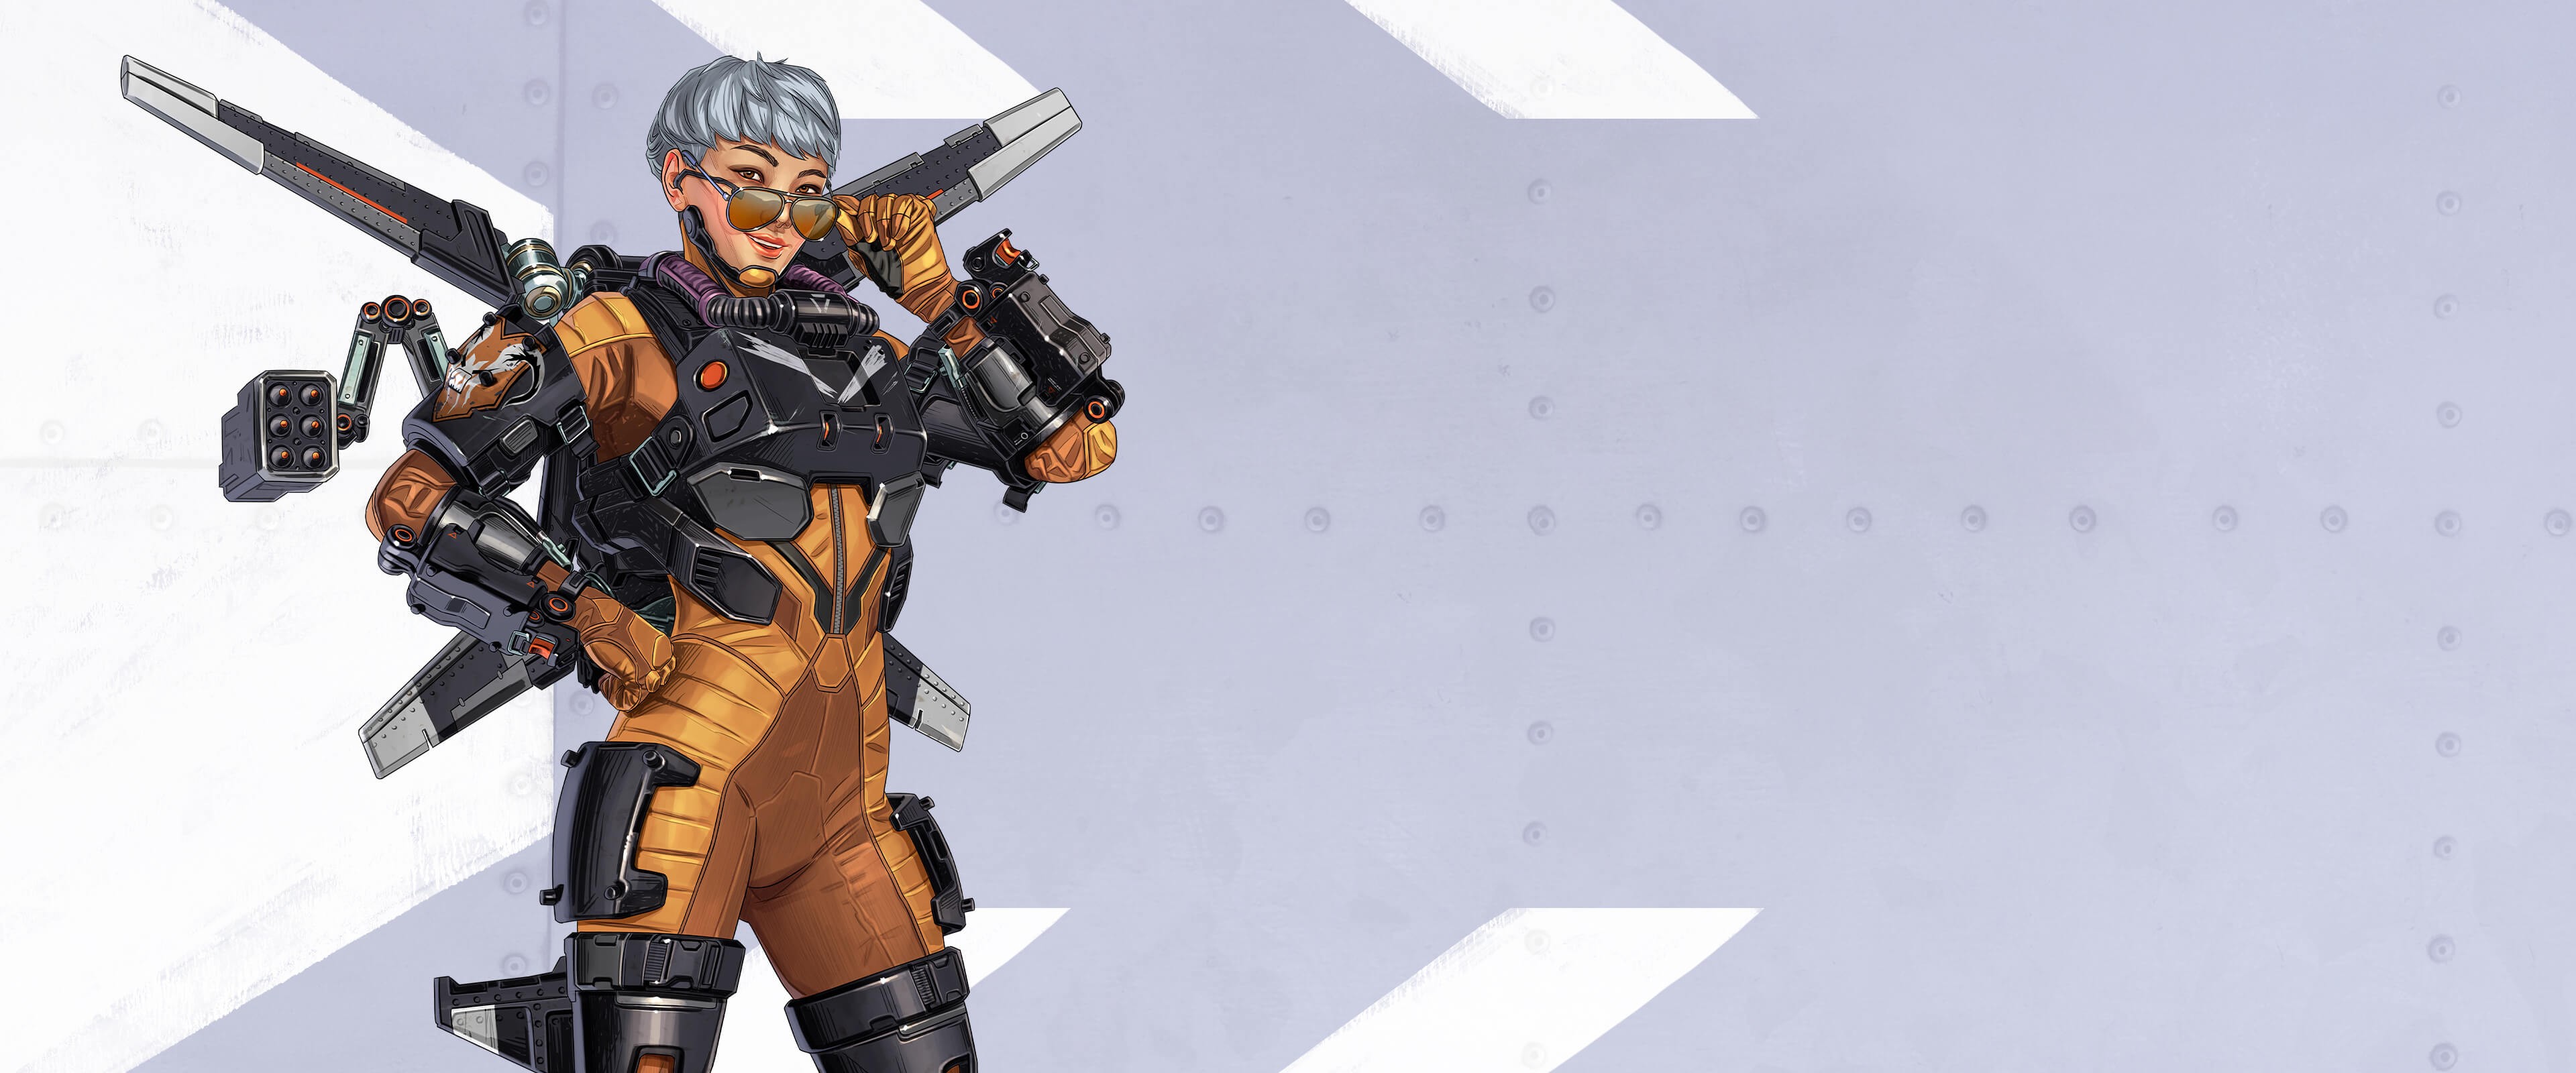 30 Valkyrie Apex Legends HD Wallpapers and Backgrounds